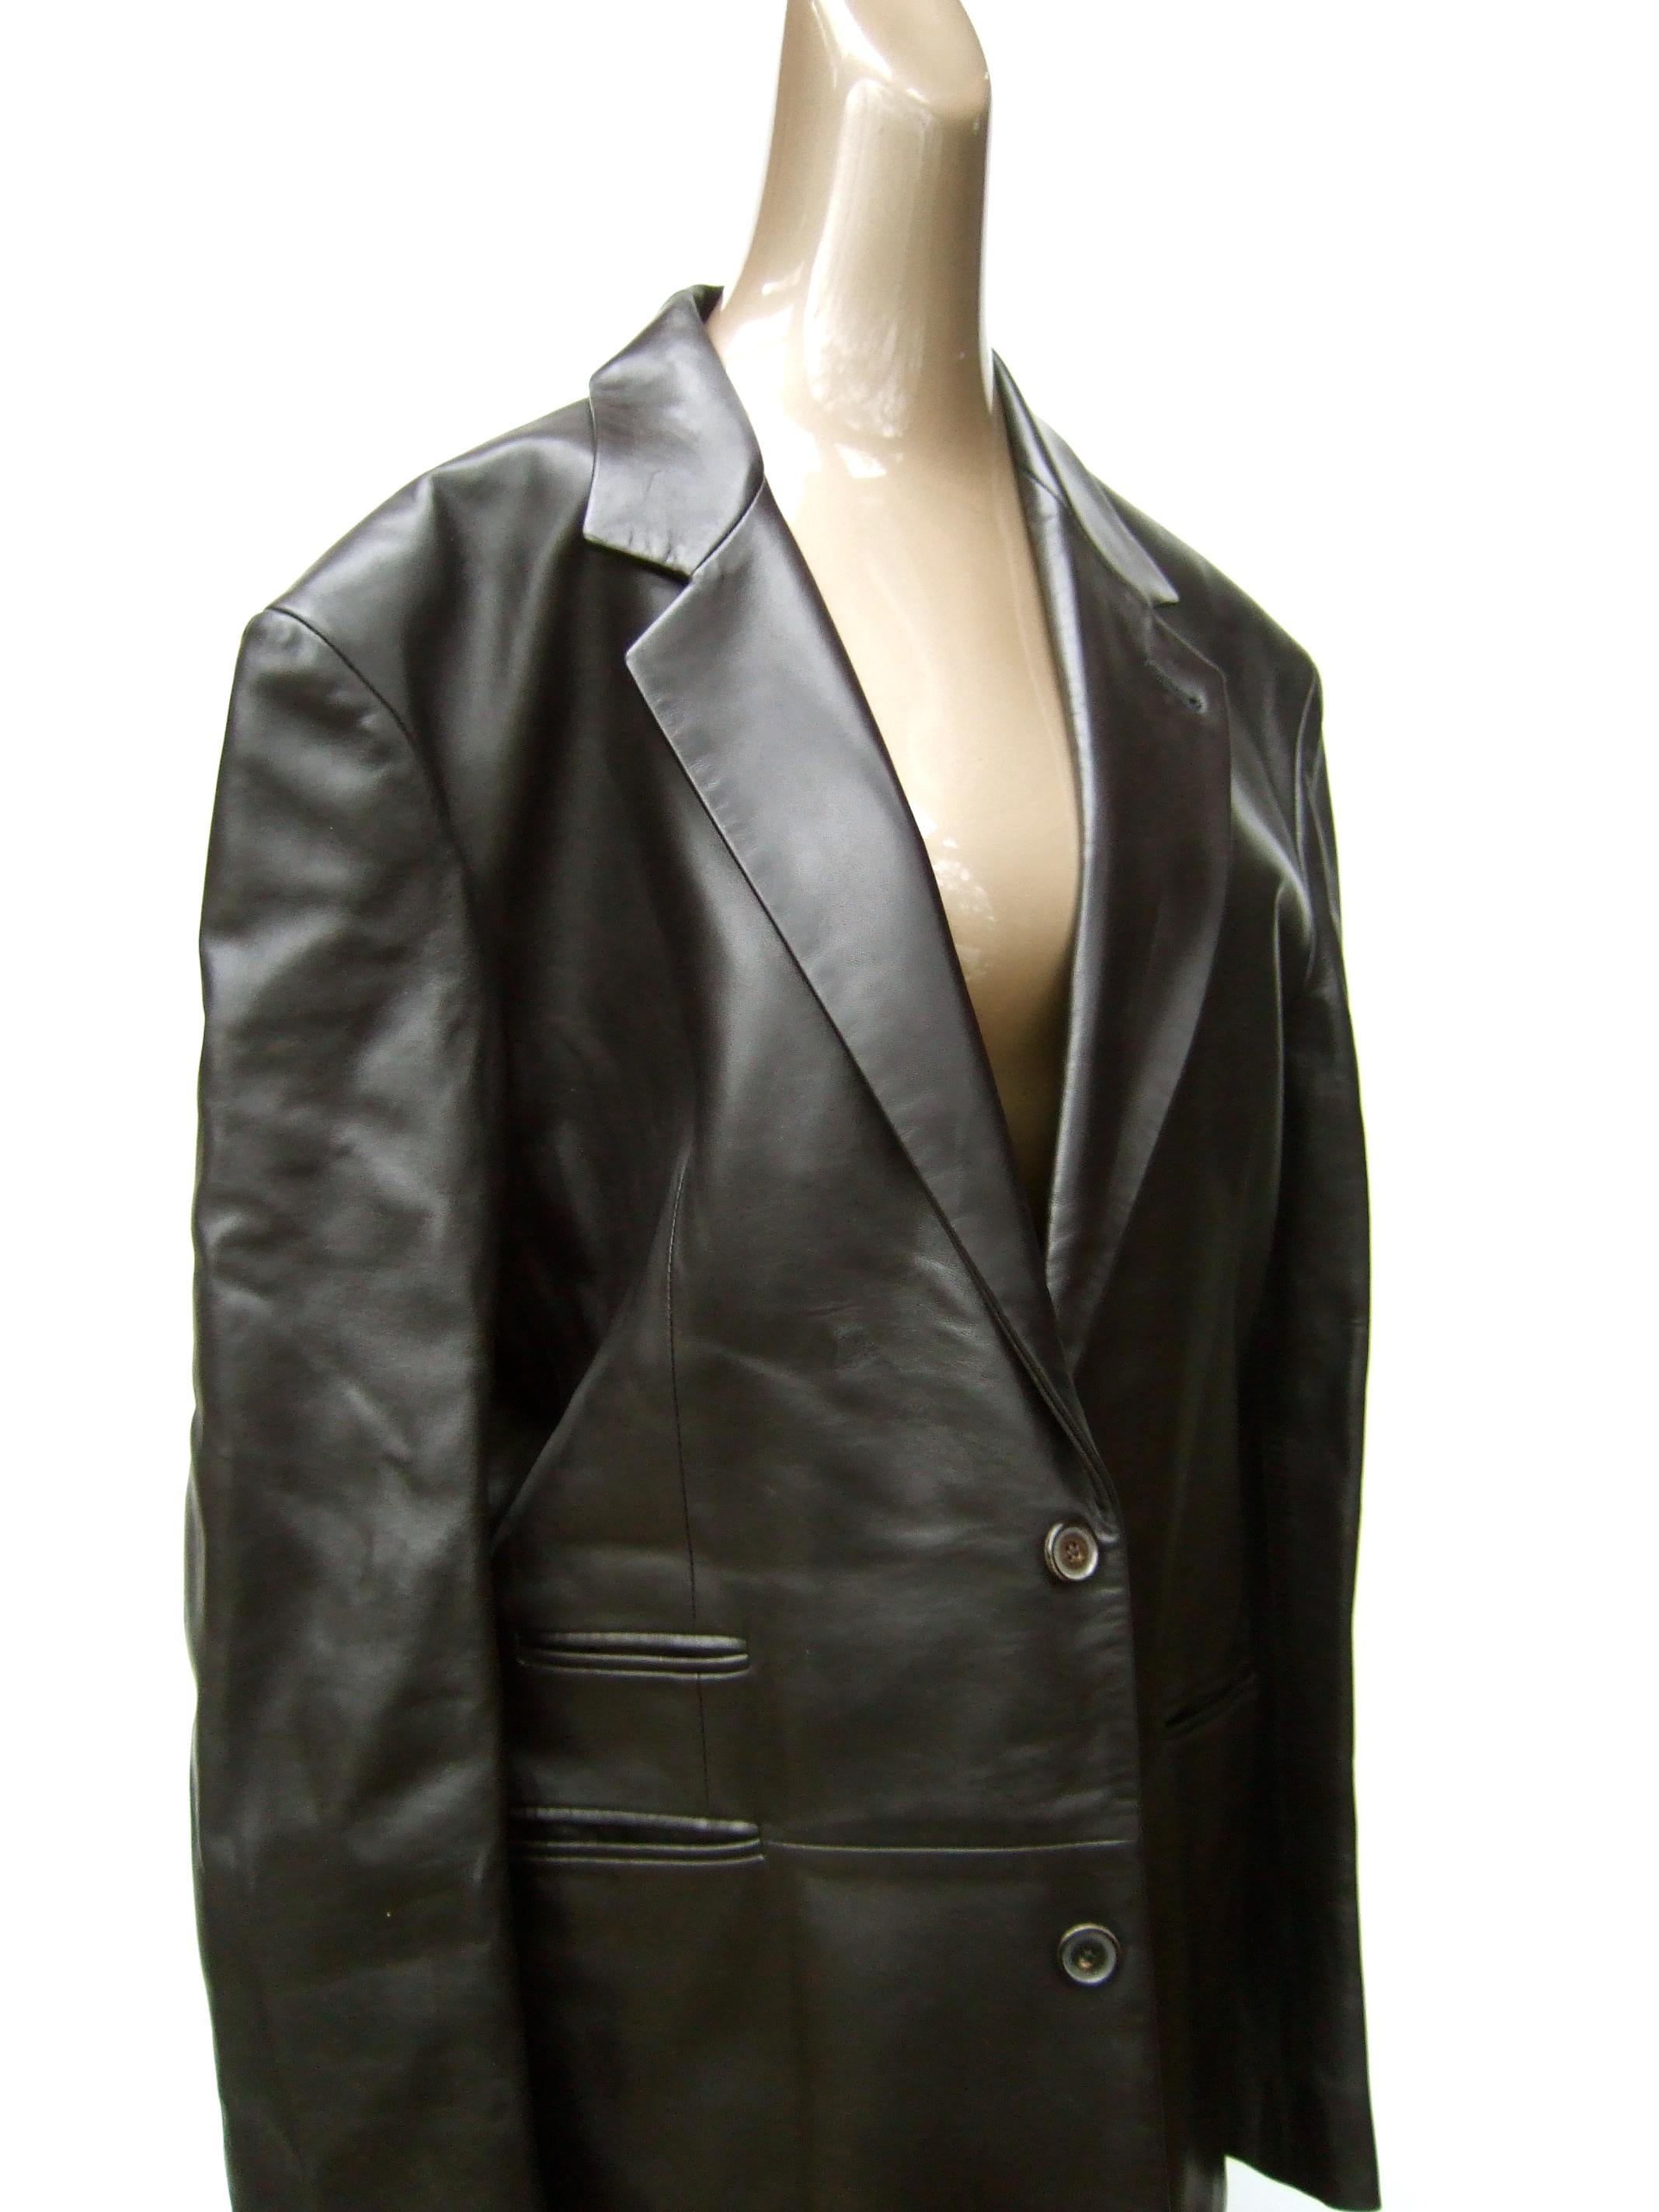 Hermes Men's Buttery Soft Black Lambskin Leather Unisex Coat Size 54 c 21st c  In Good Condition For Sale In University City, MO